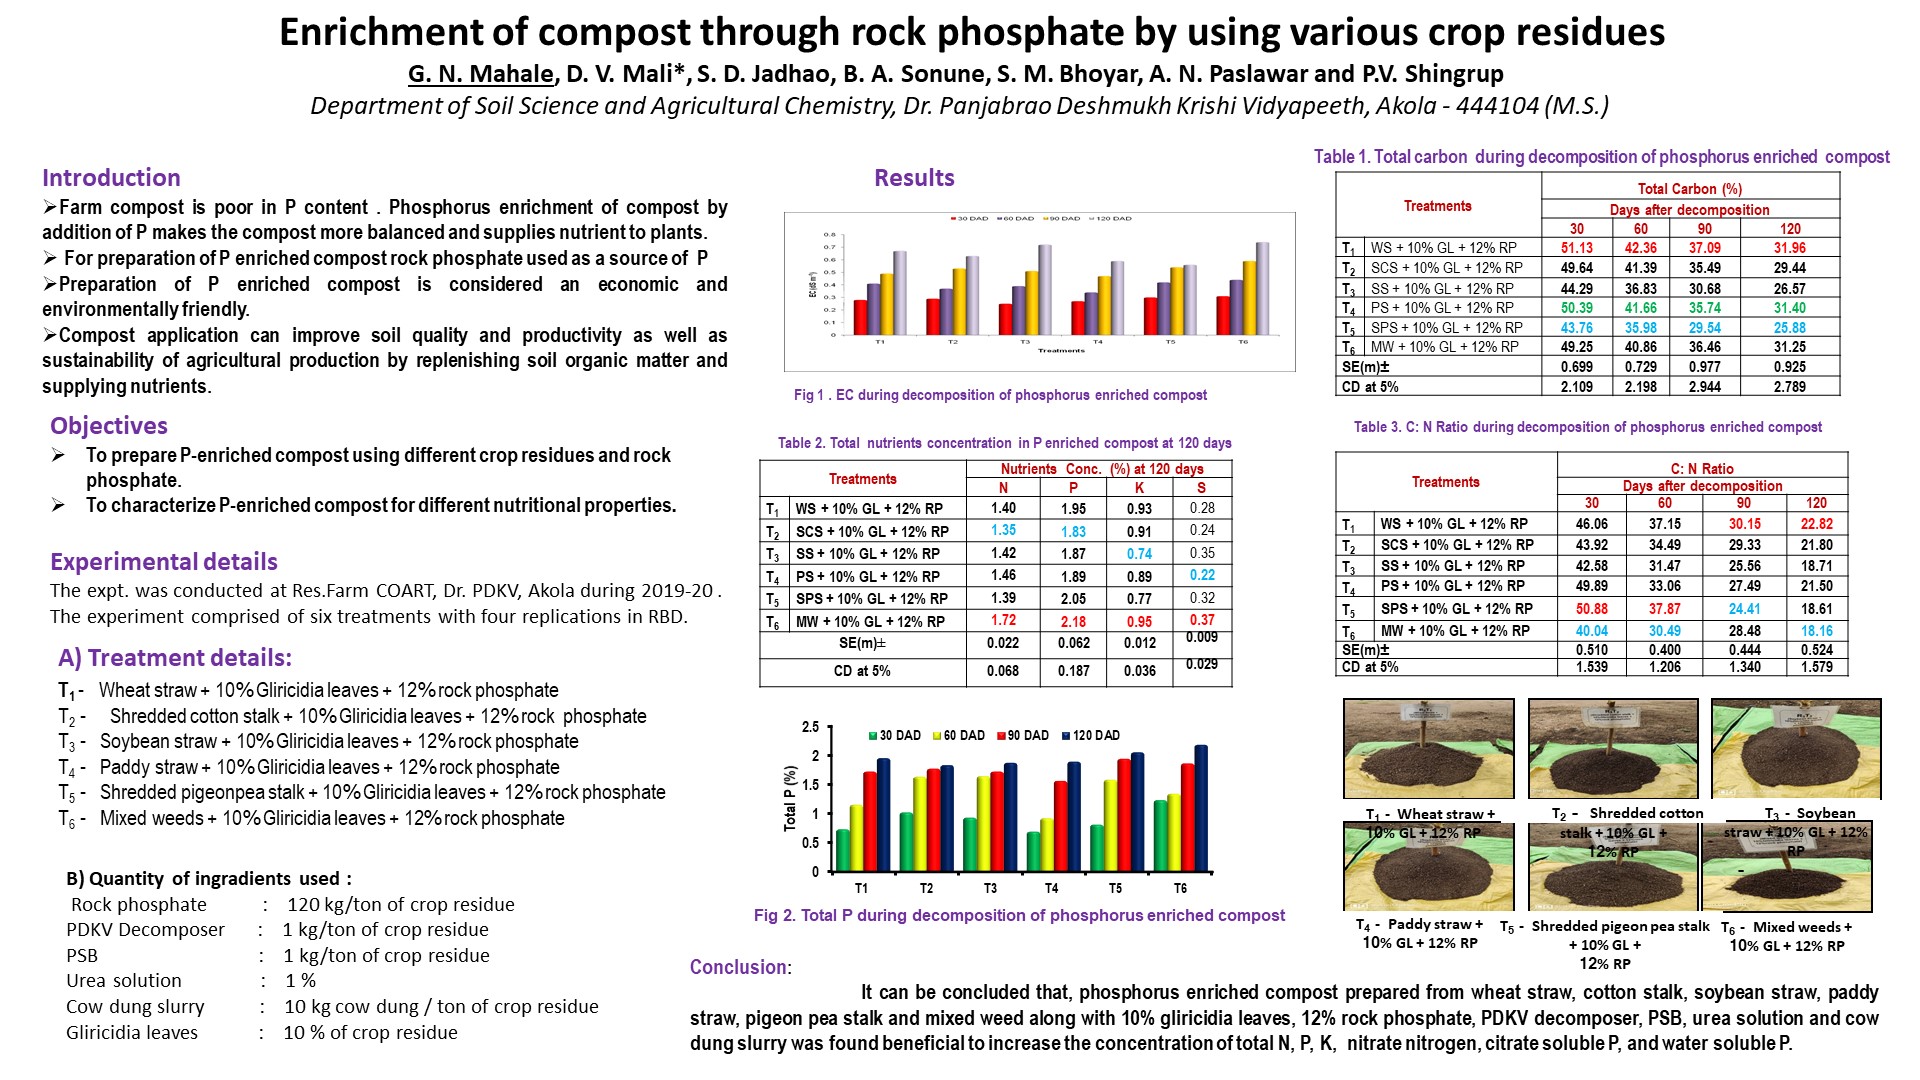 Enrichment of compost through rock phosphate by using various crop residues